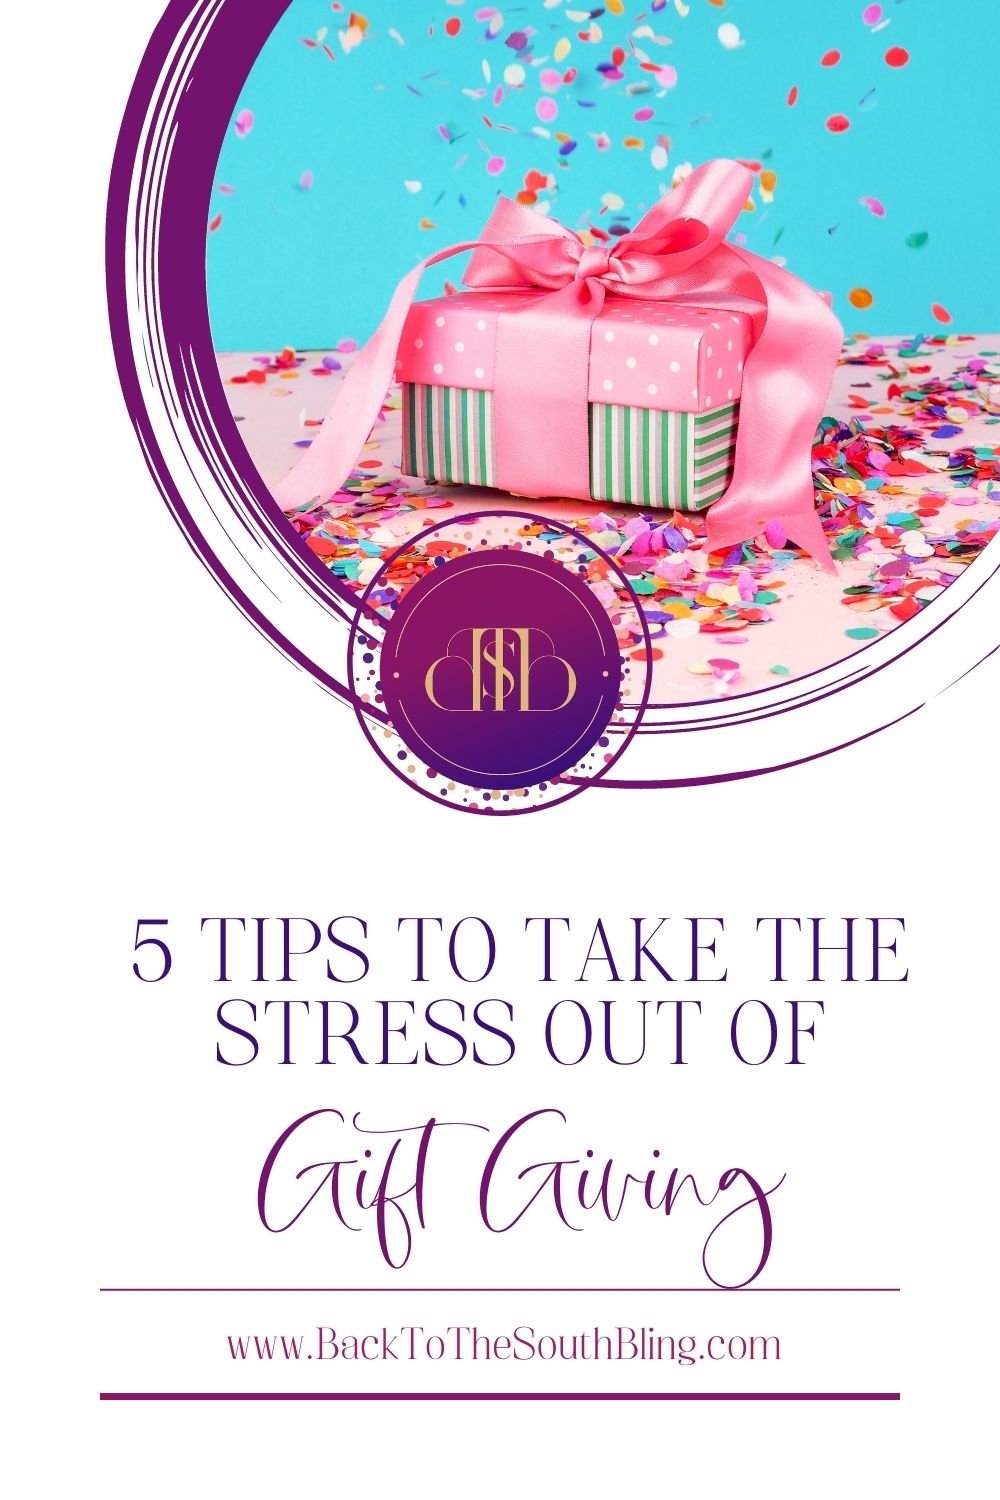 5 Tips to Take the Stress Out of Gift Giving